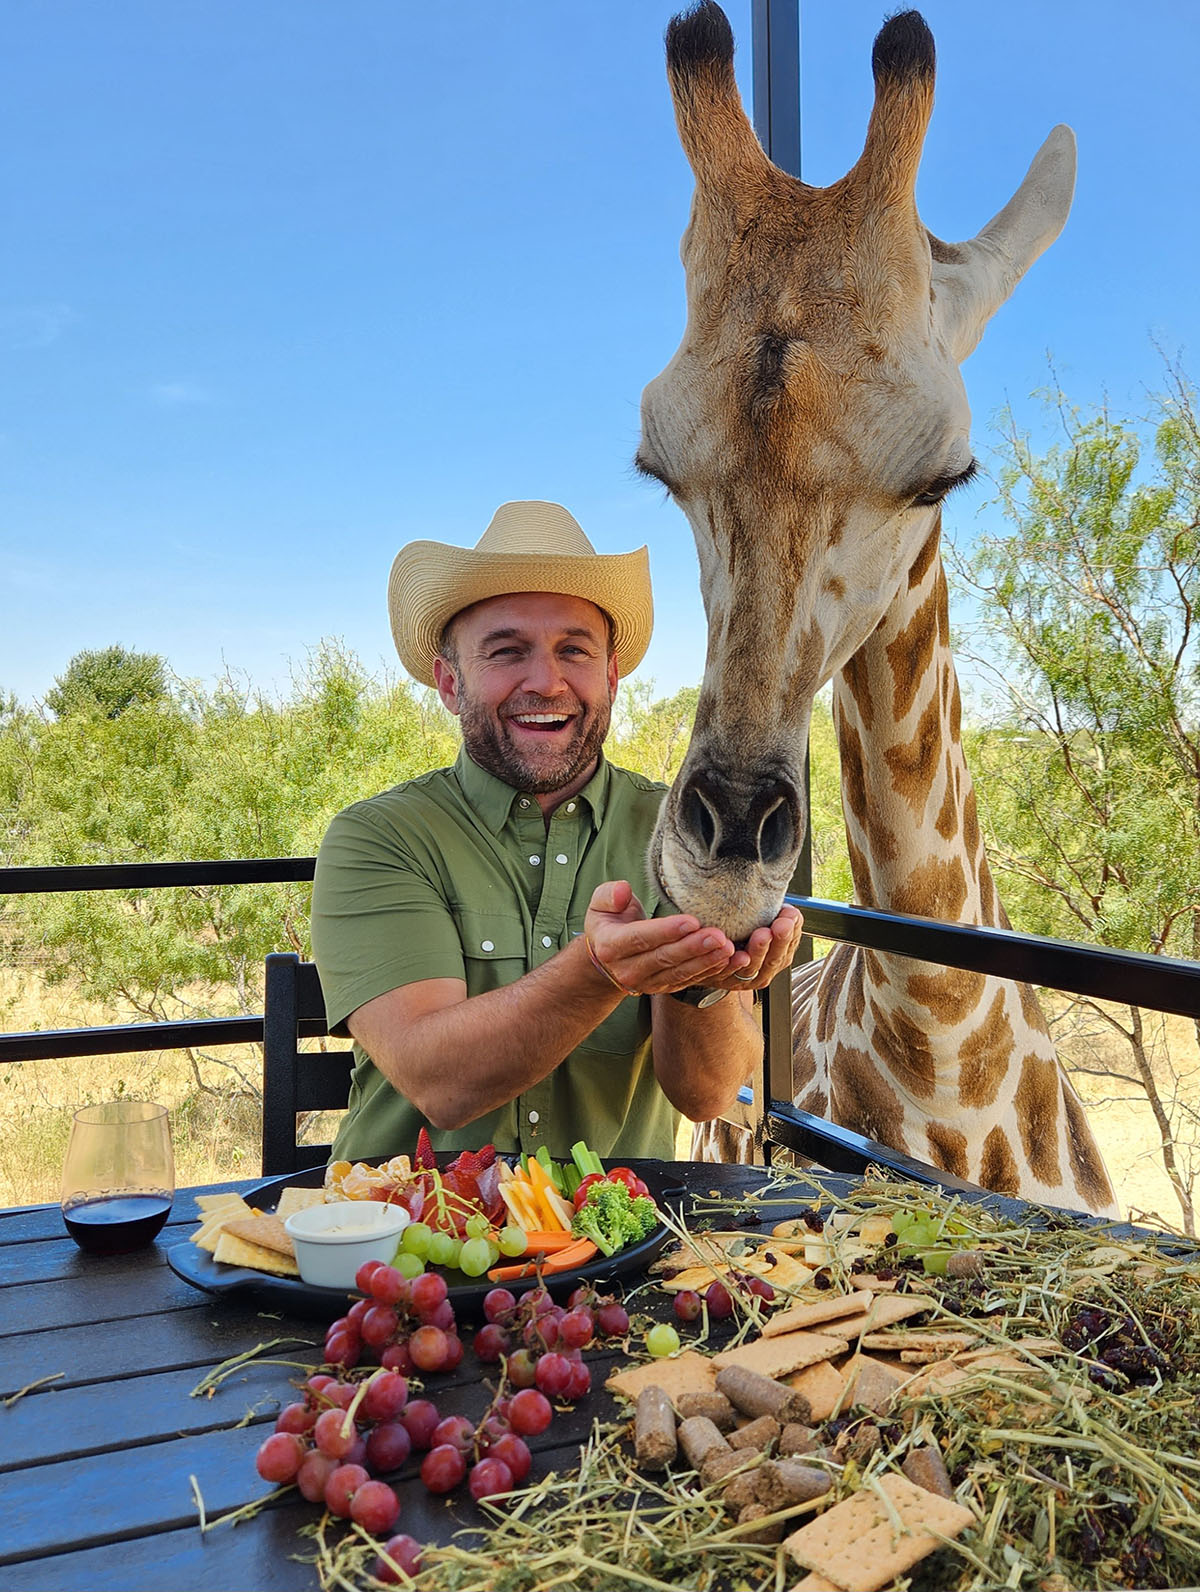 A picture of a man eating a fruit plate and sharing with a giraffe